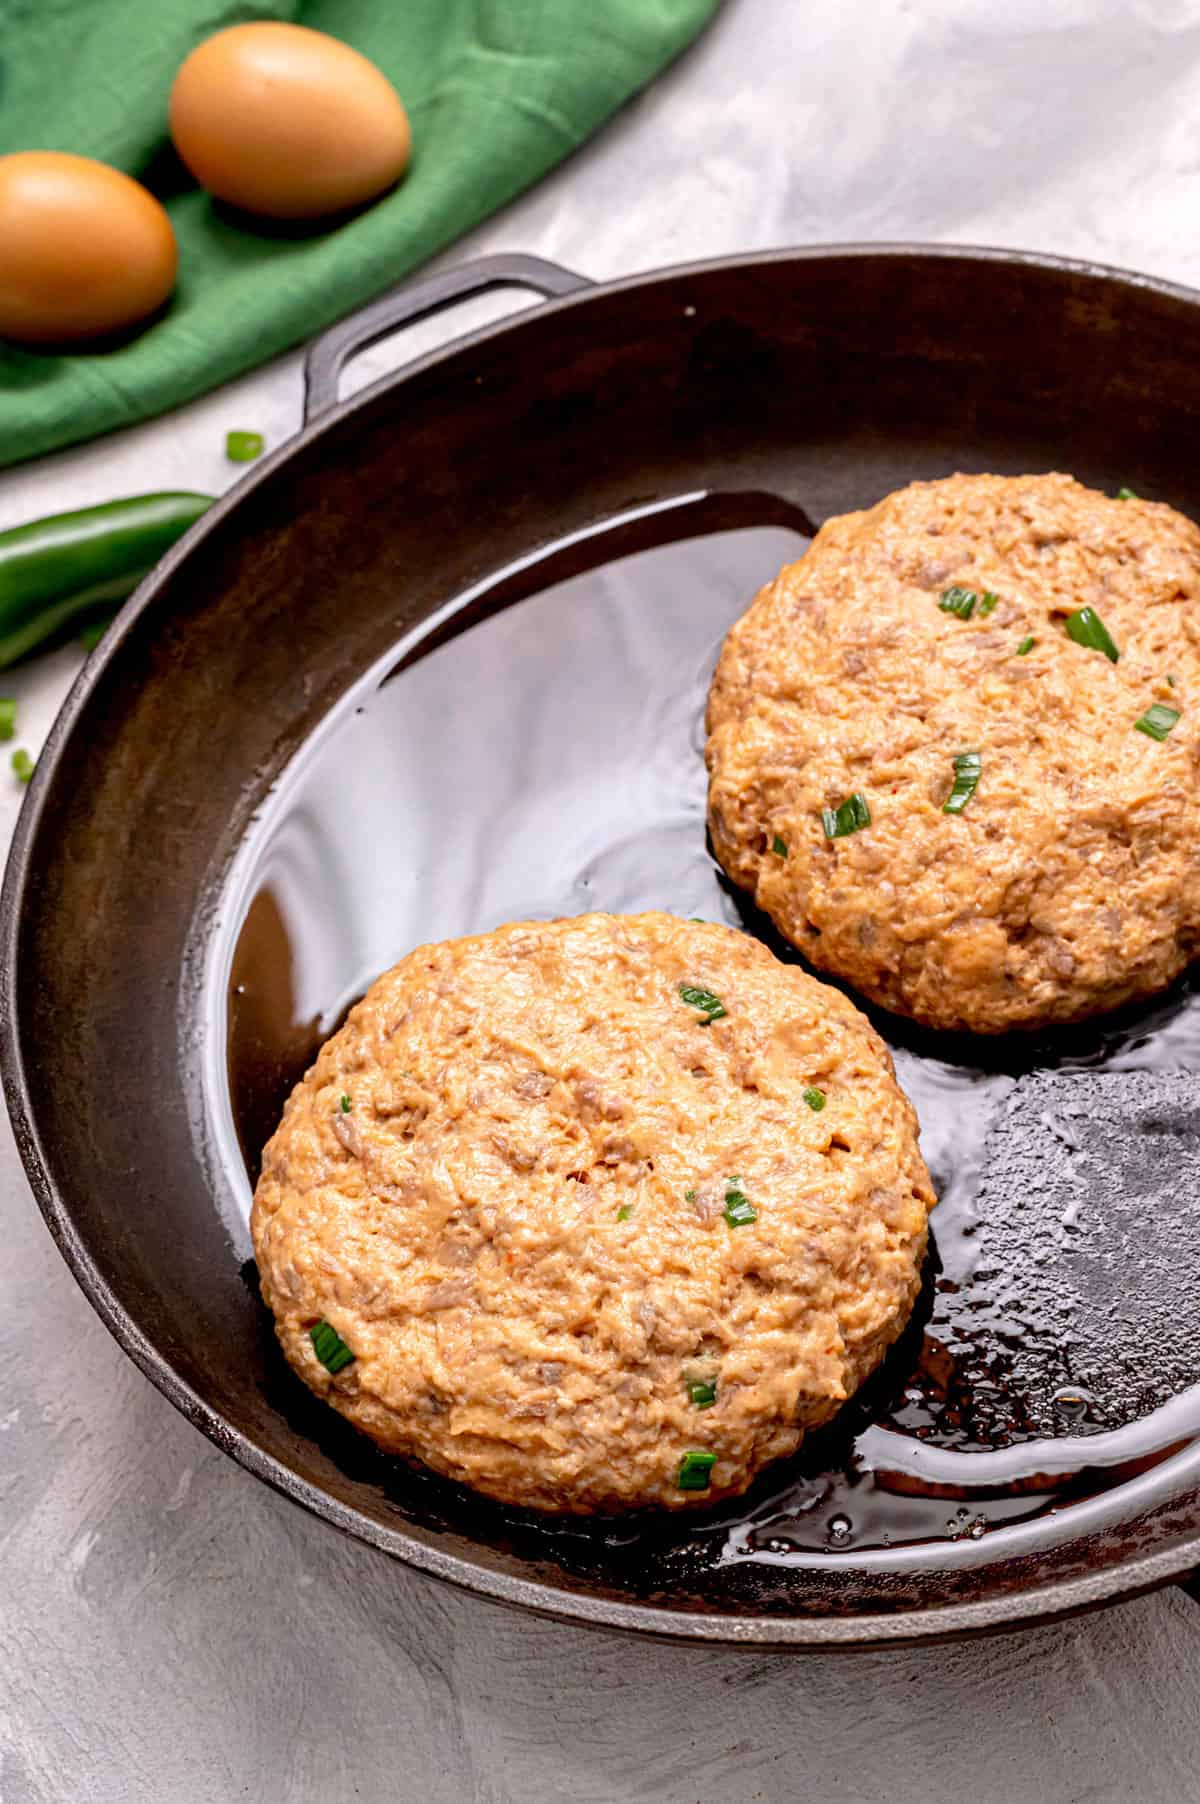 Healthy salmon burgers cooking in a pan.